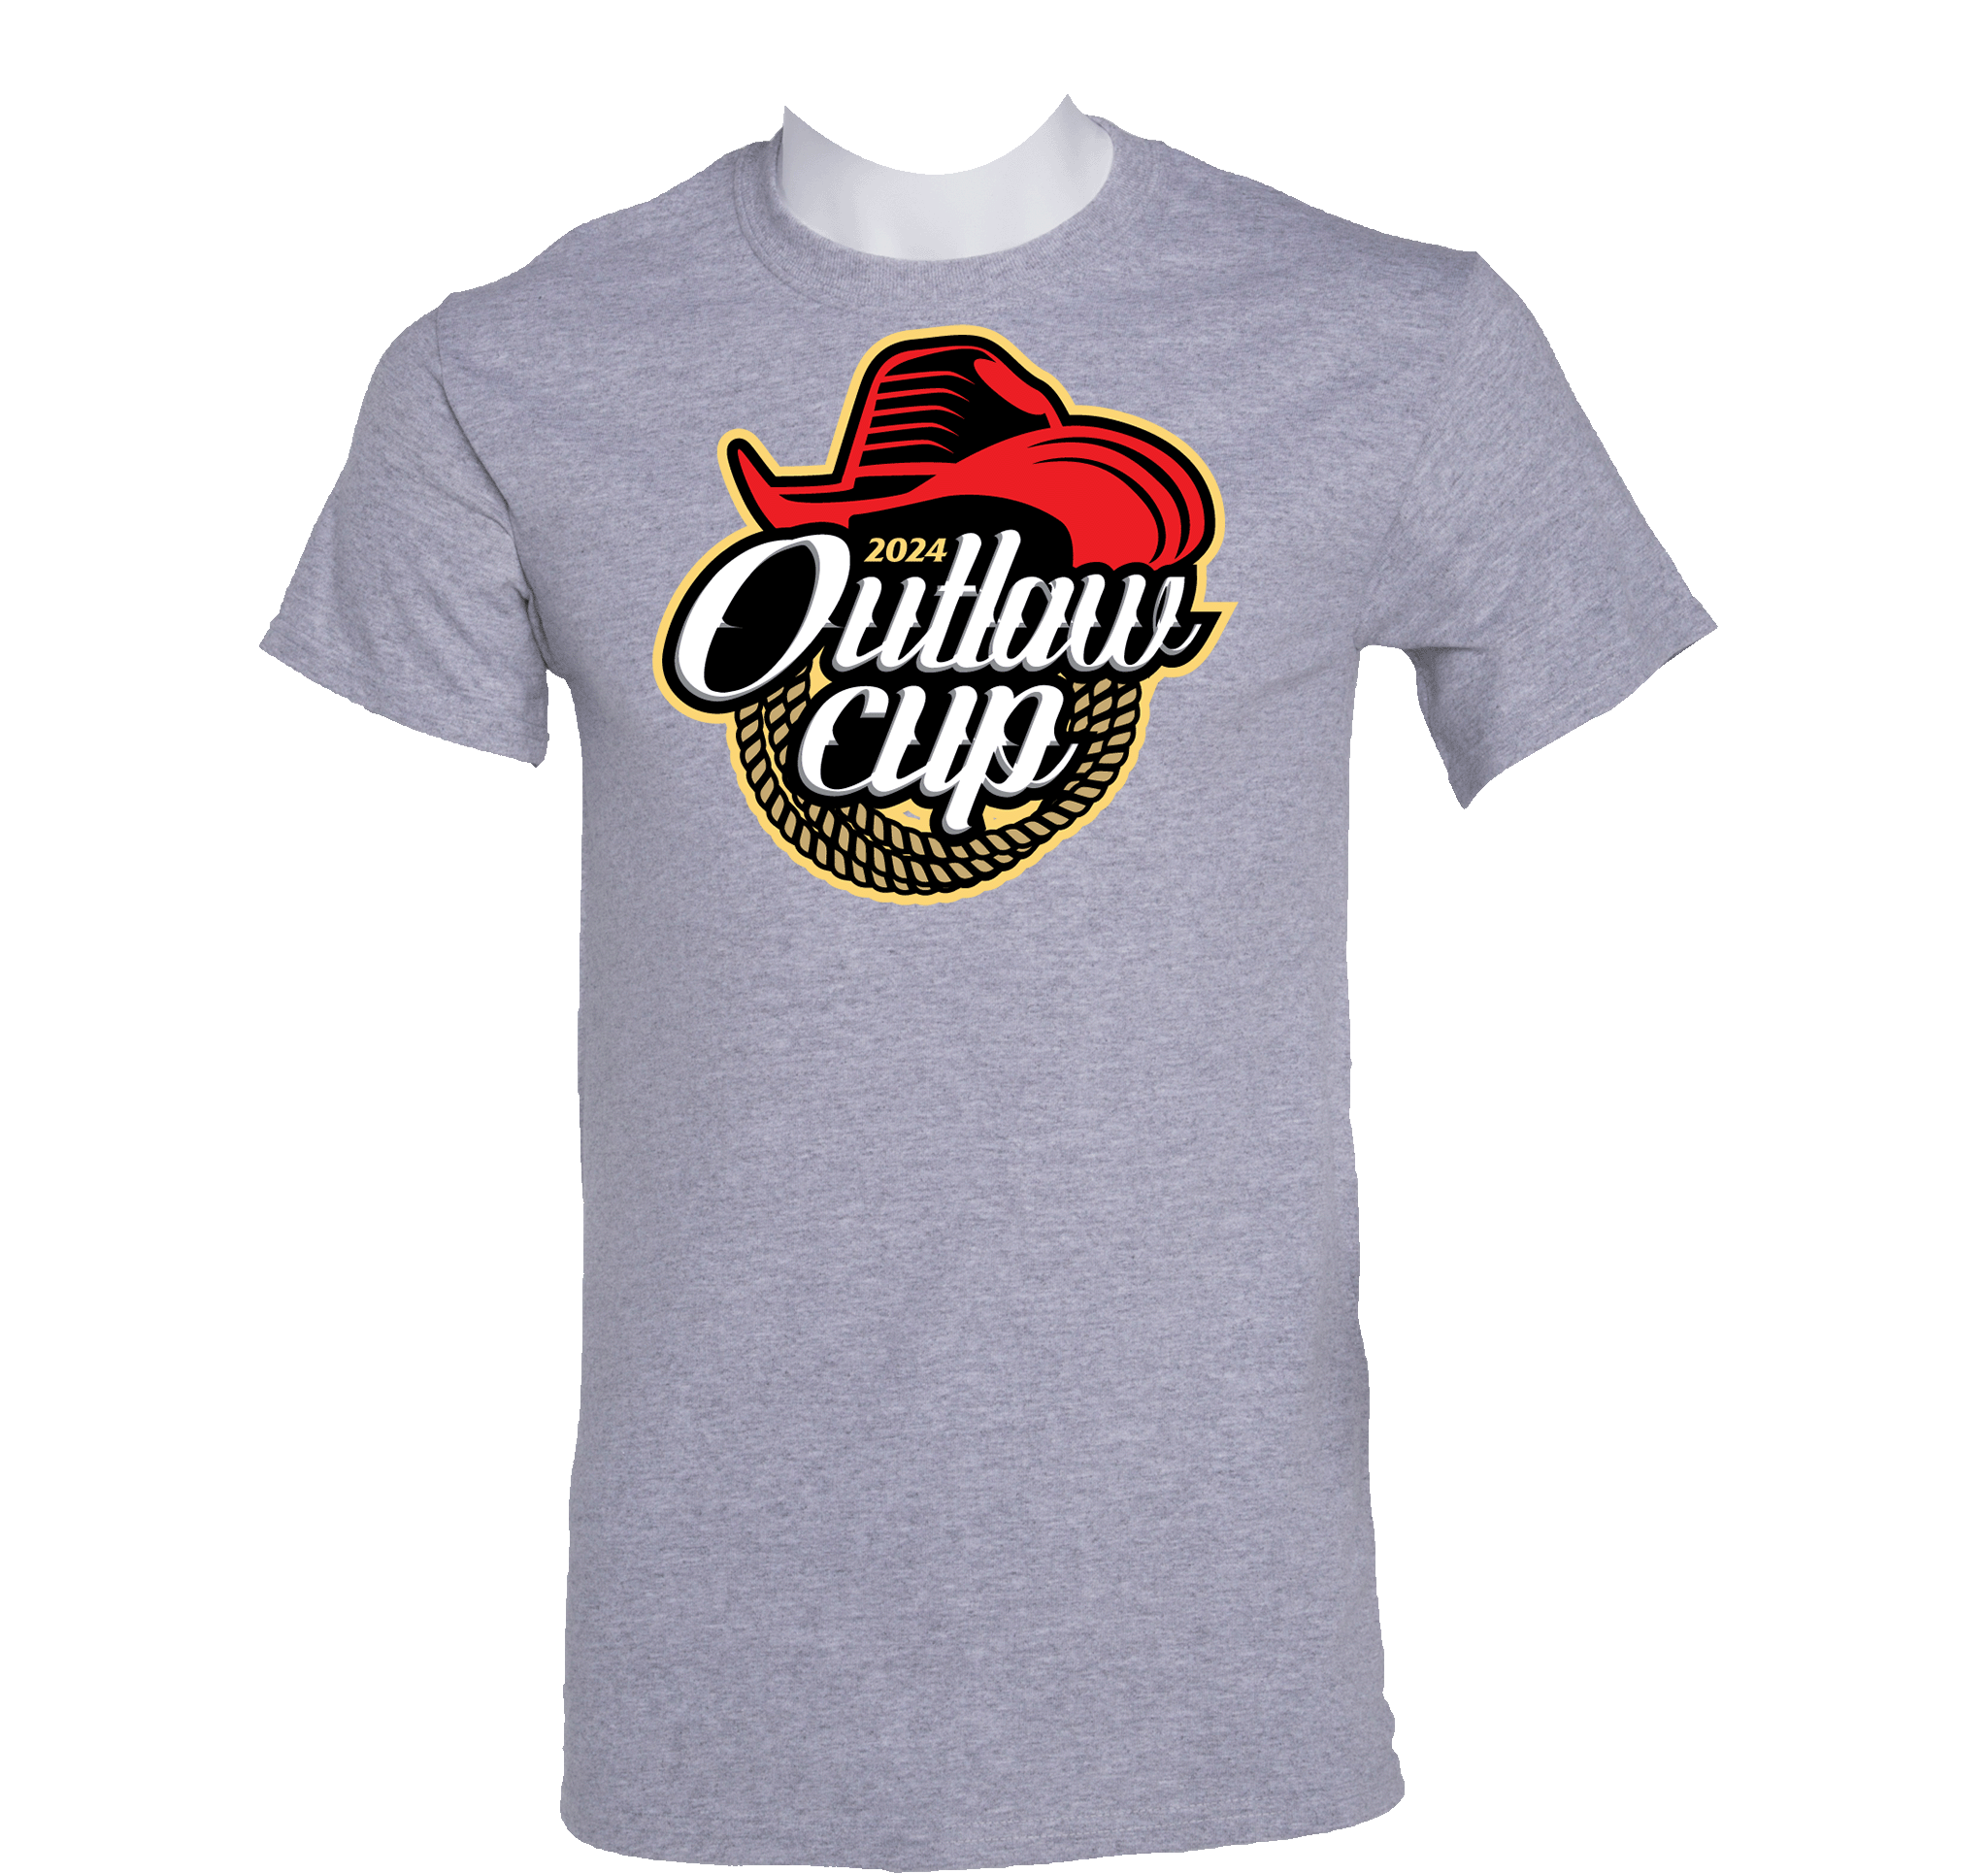 Short Sleeves - 2024 Outlaw Cup